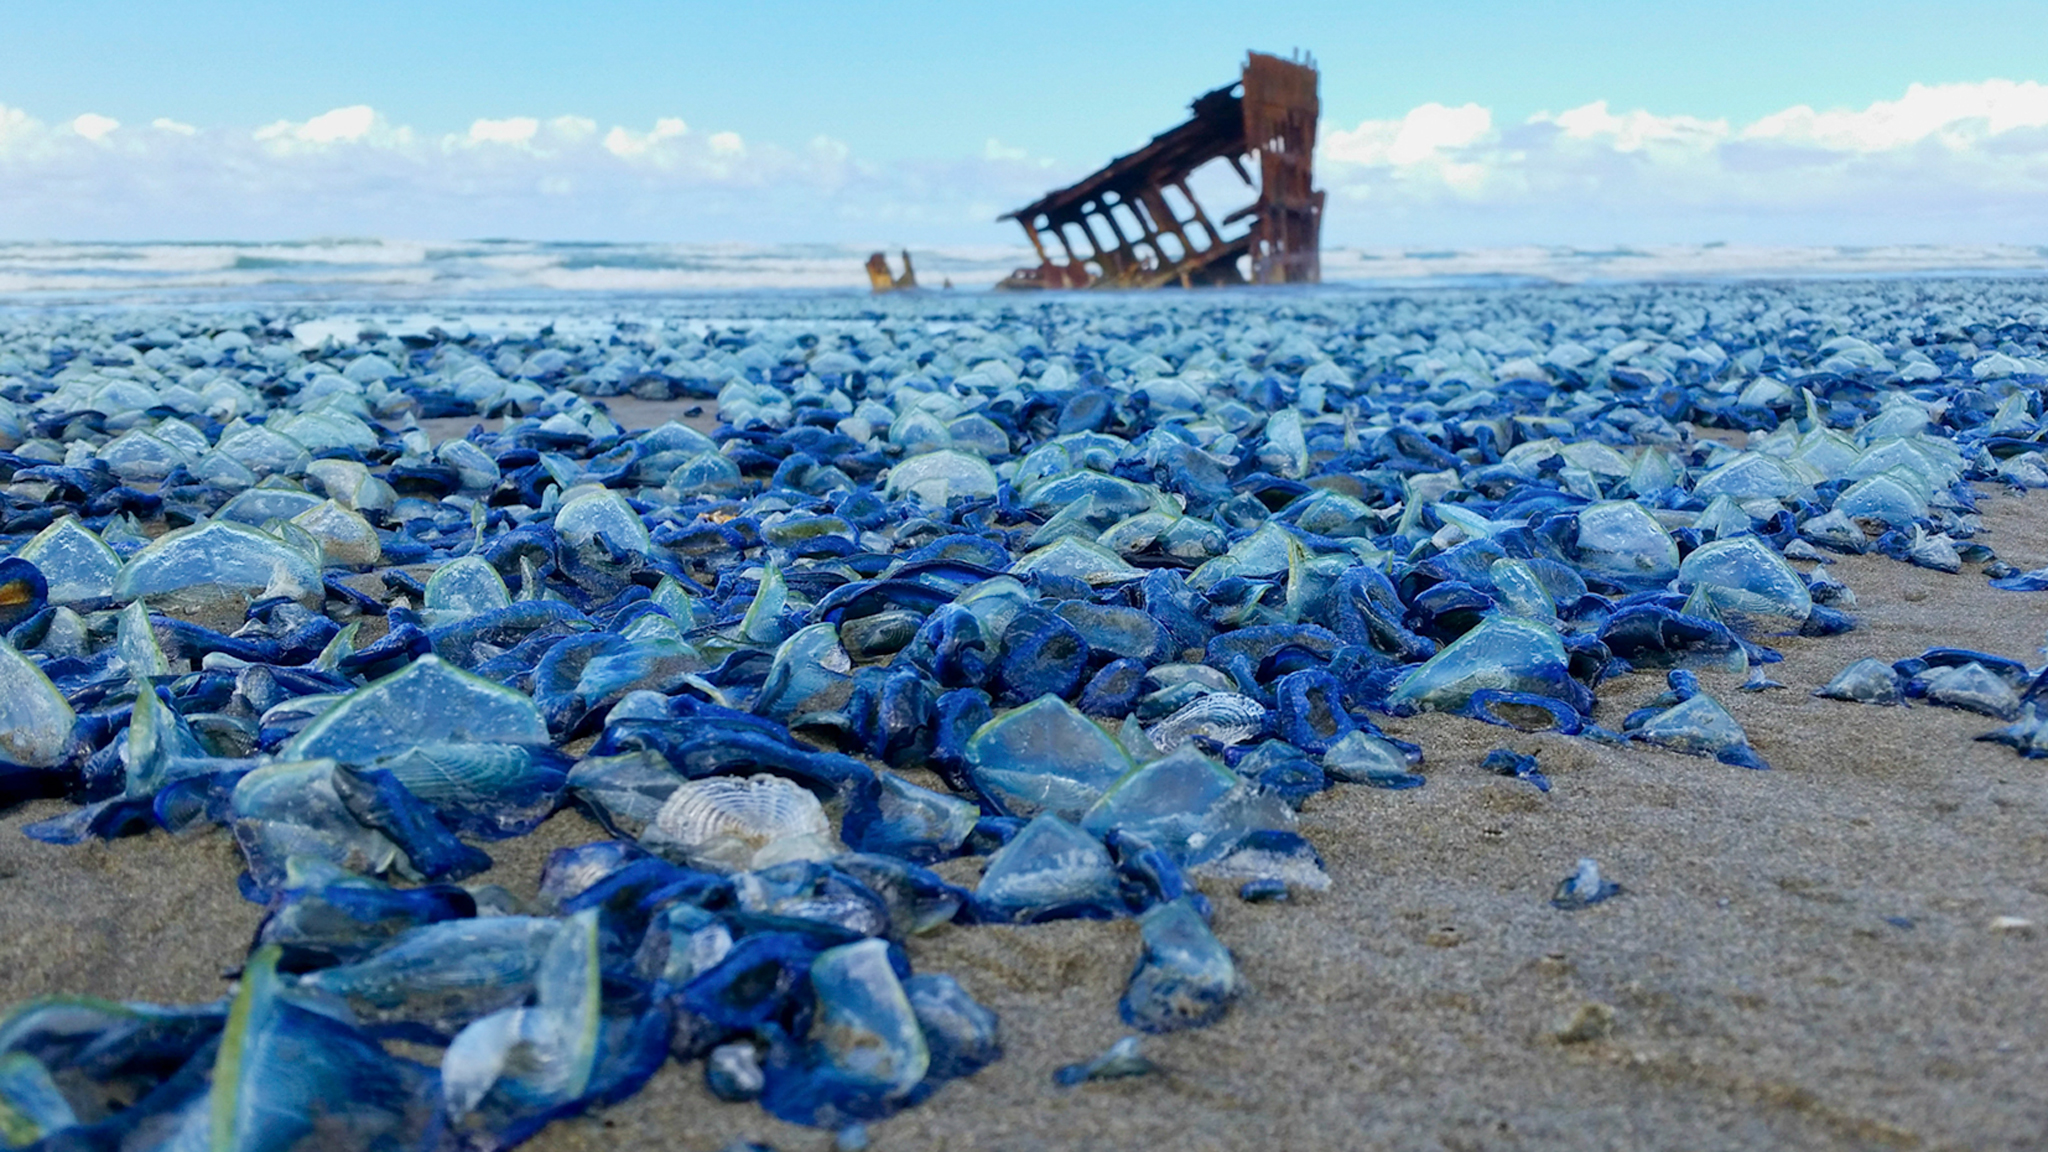 Pictures: Billions of Blue Jellyfish Wash Up on American Beaches